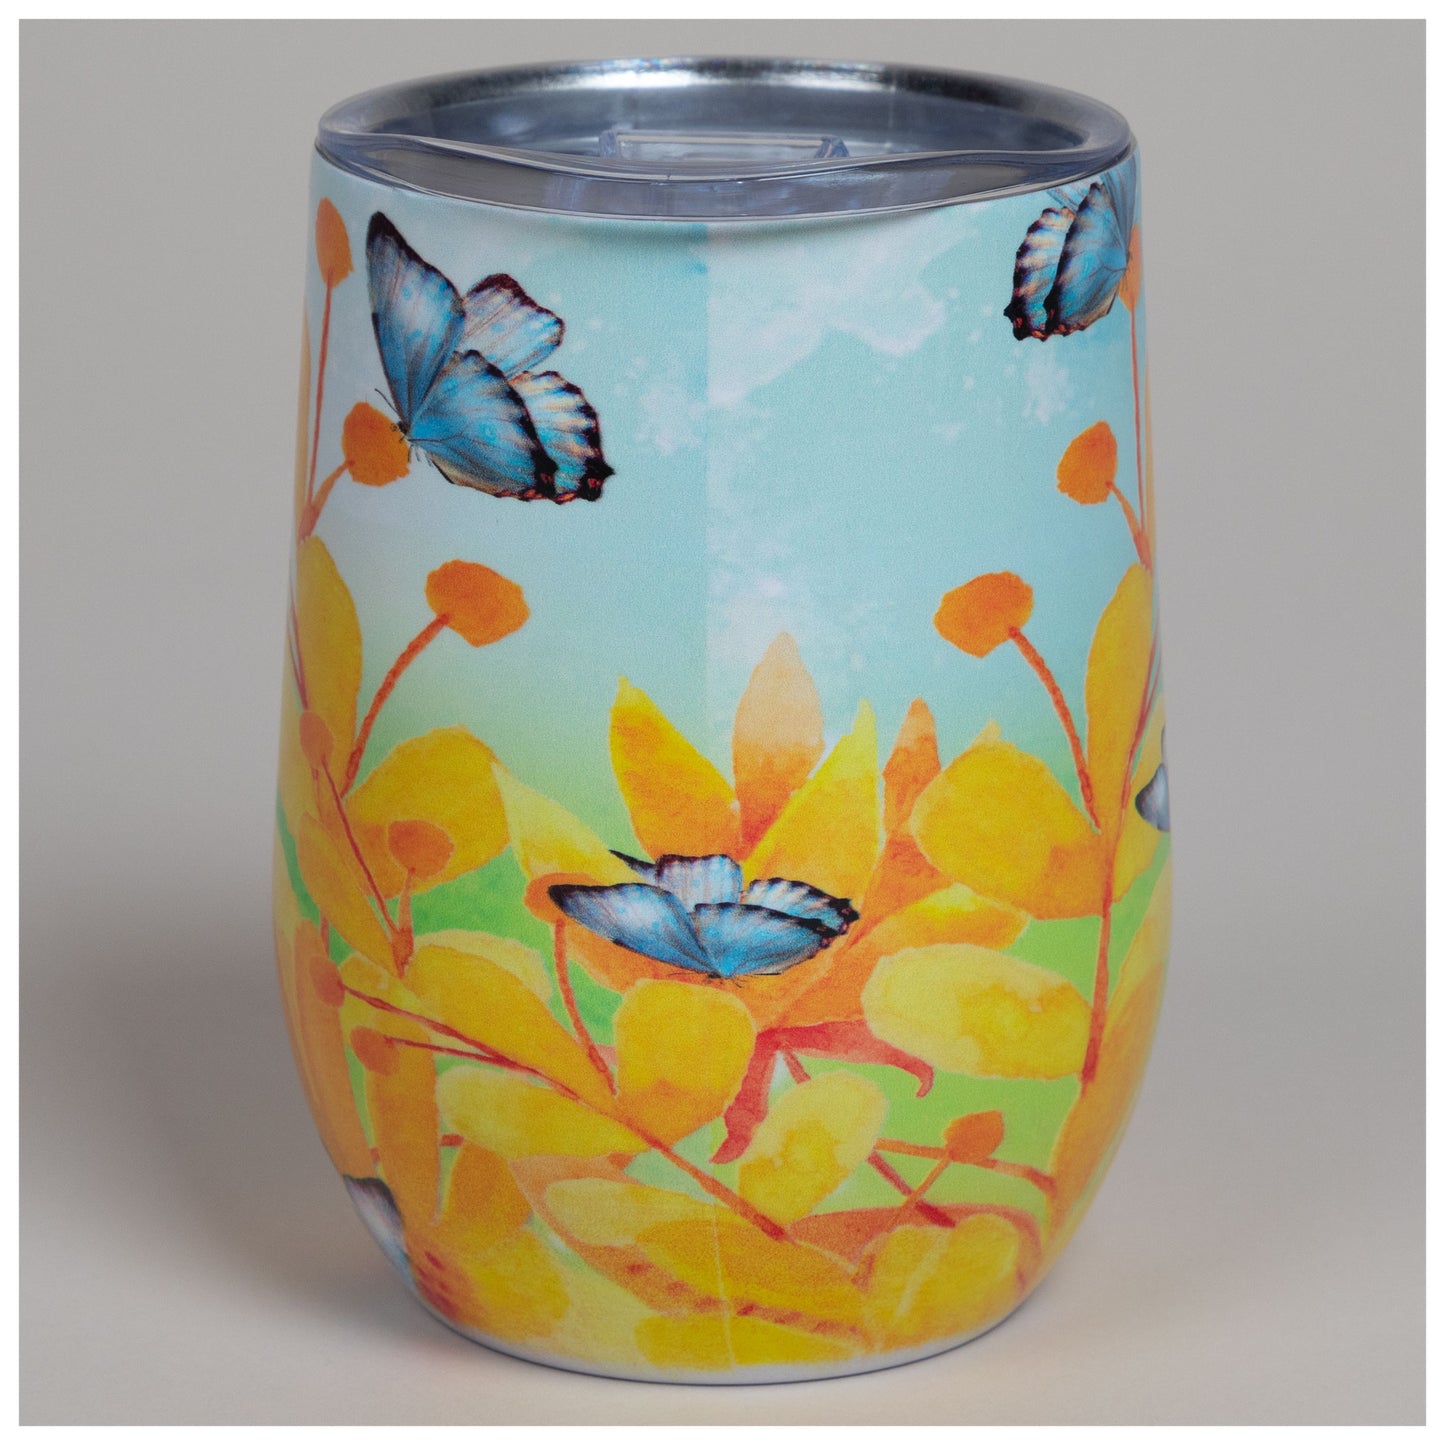 Colorful Garden Stainless Steel Insulated Wine Tumbler